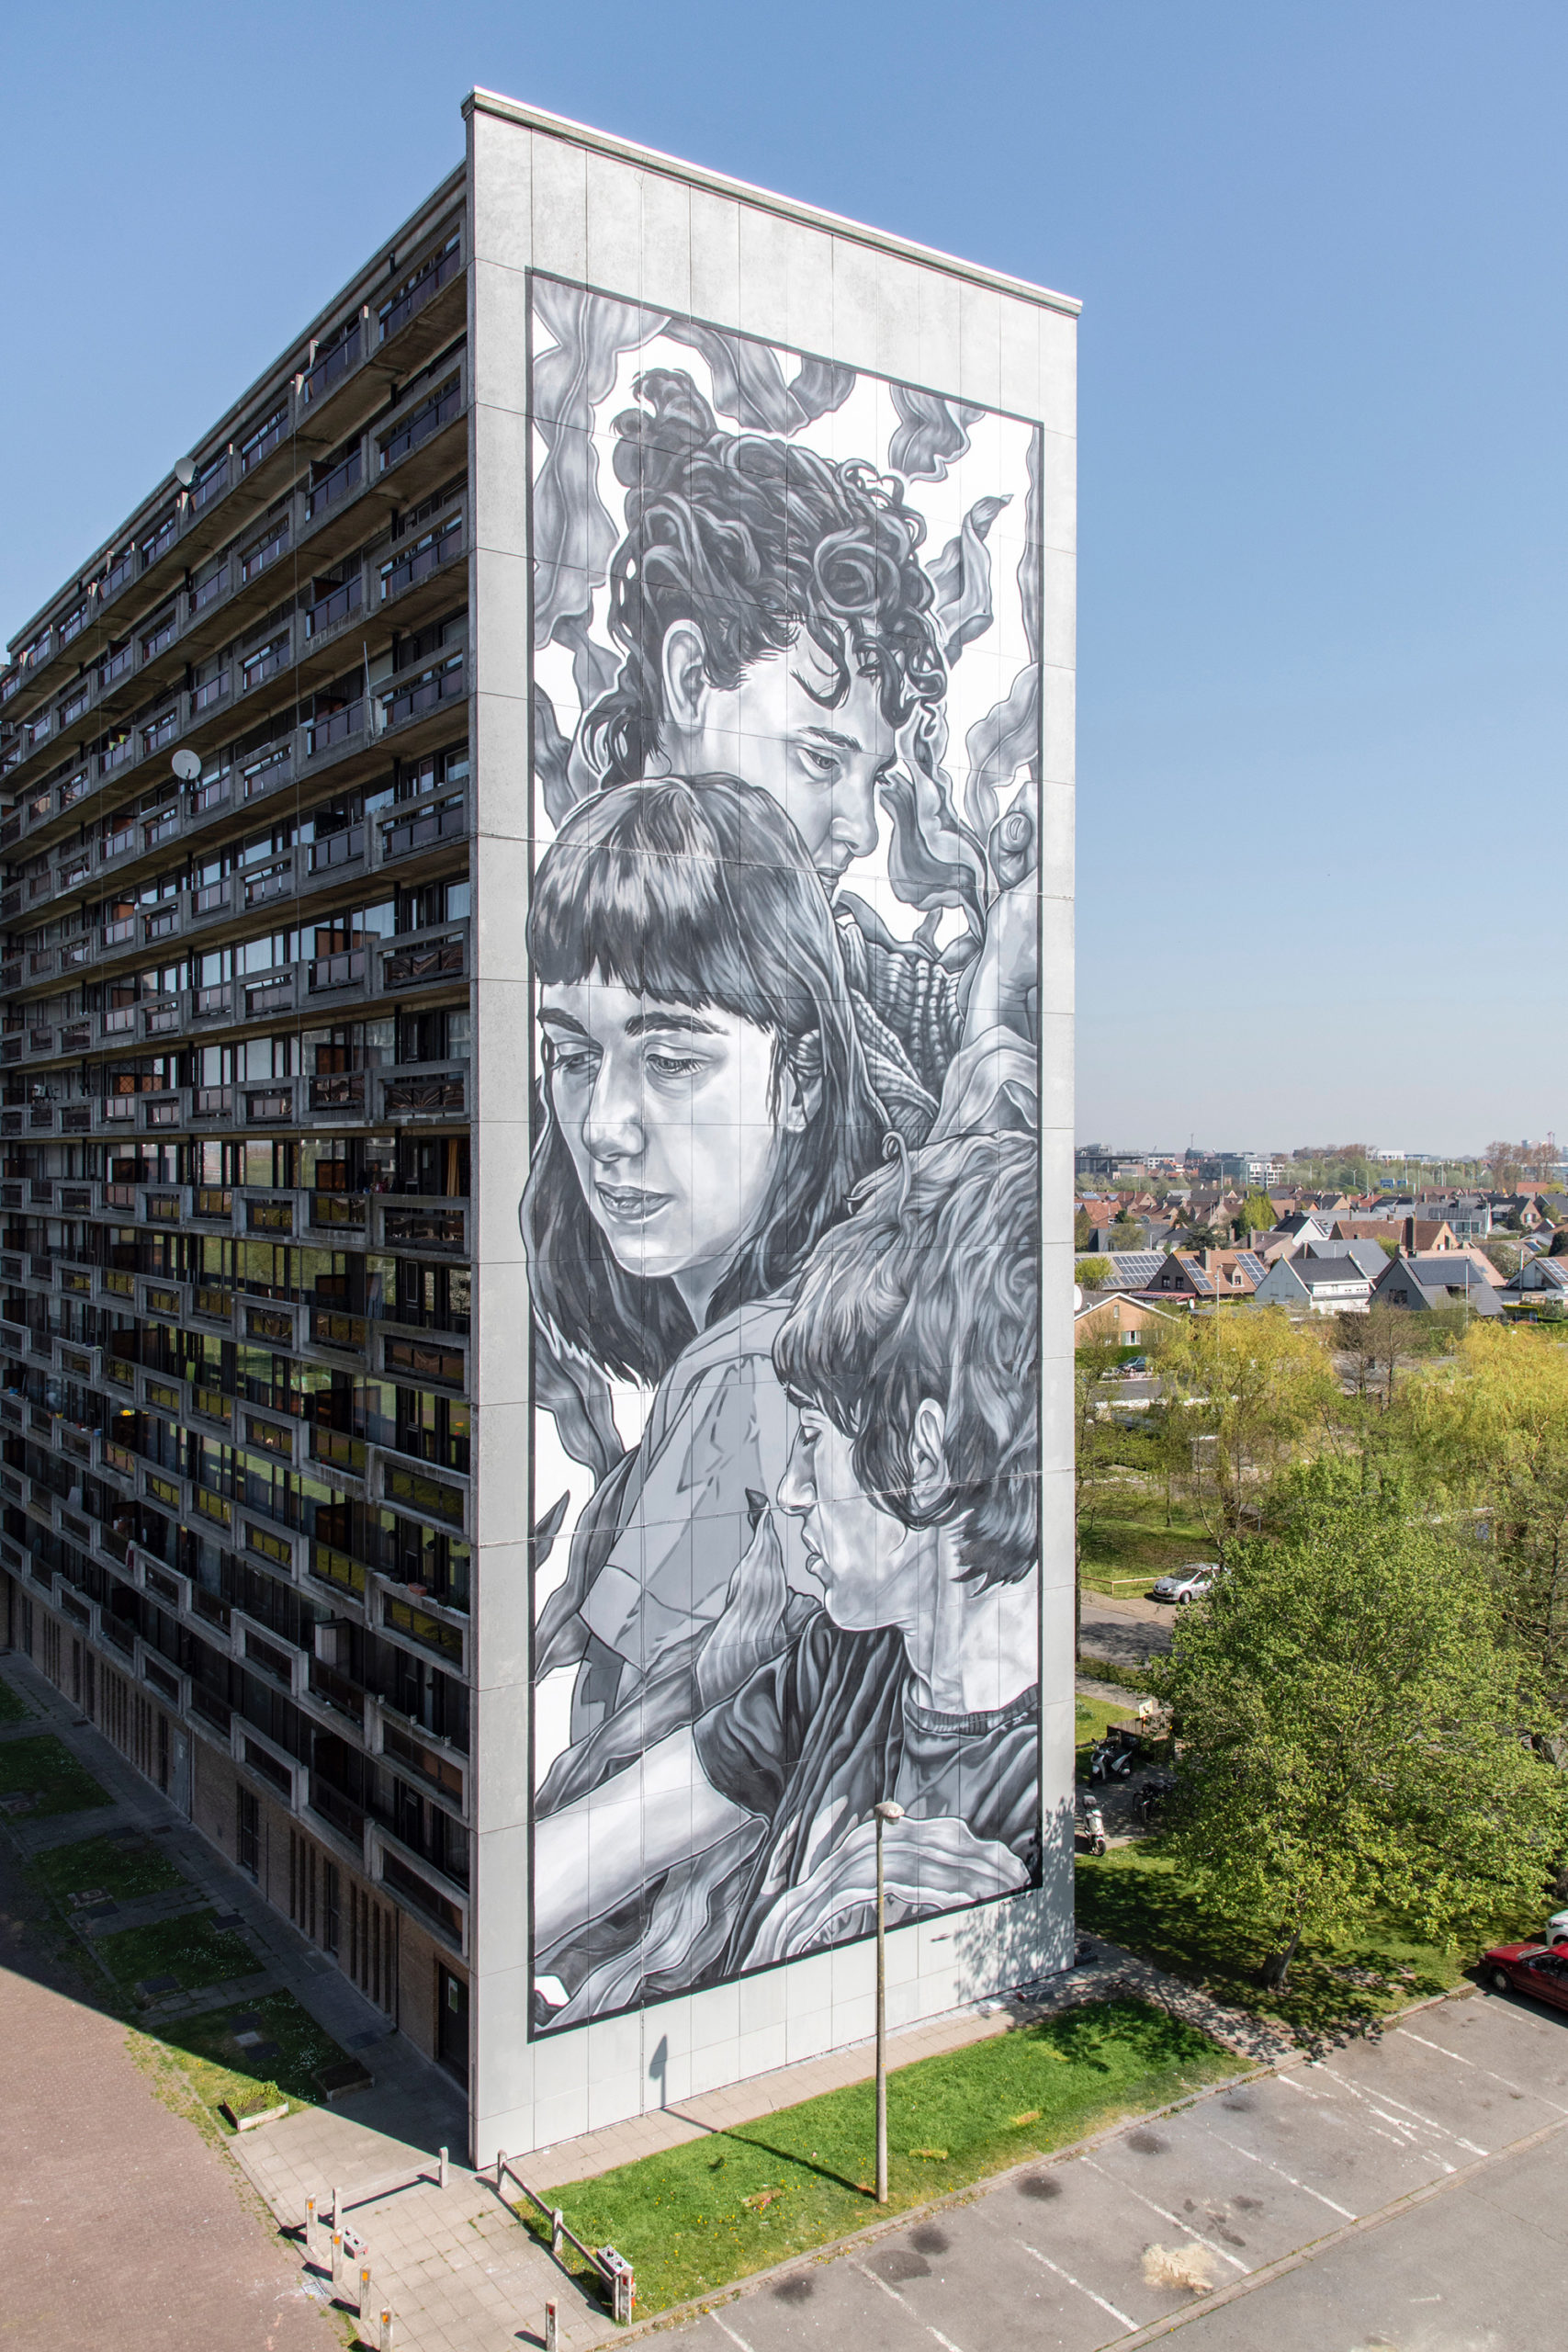 Illustrative Murals in Shades of Grey by Paola Delfín Characterize Human Bonds